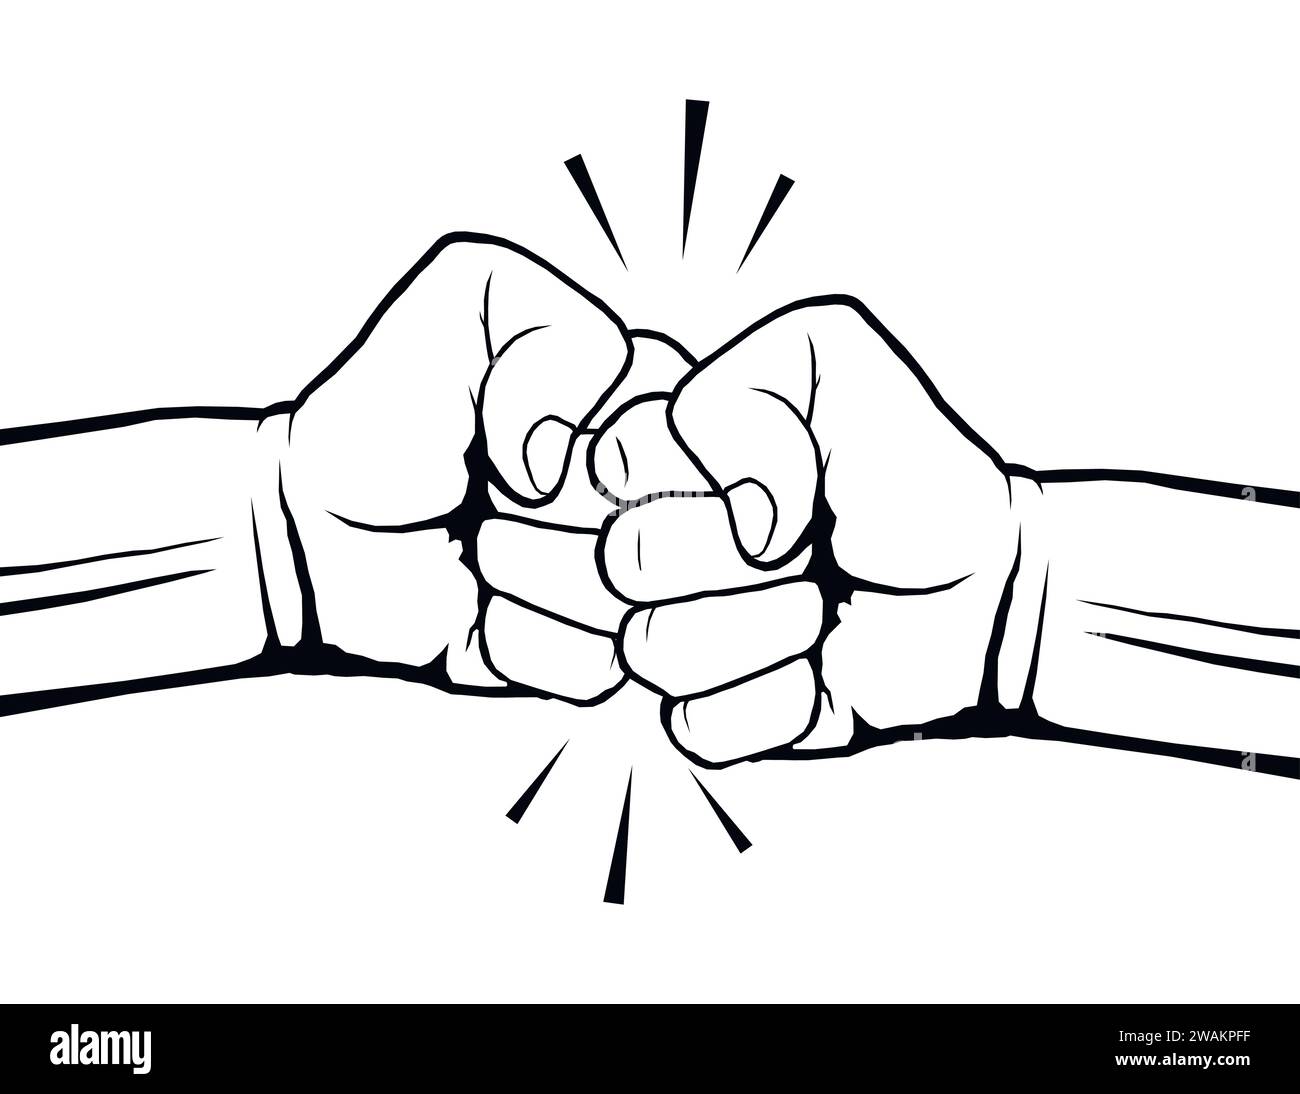 Hand drawn of two fists bumping together. Concept of teamwork, partnership, friendship, passion or conflict, confrontation, resistance, competition, s Stock Vector